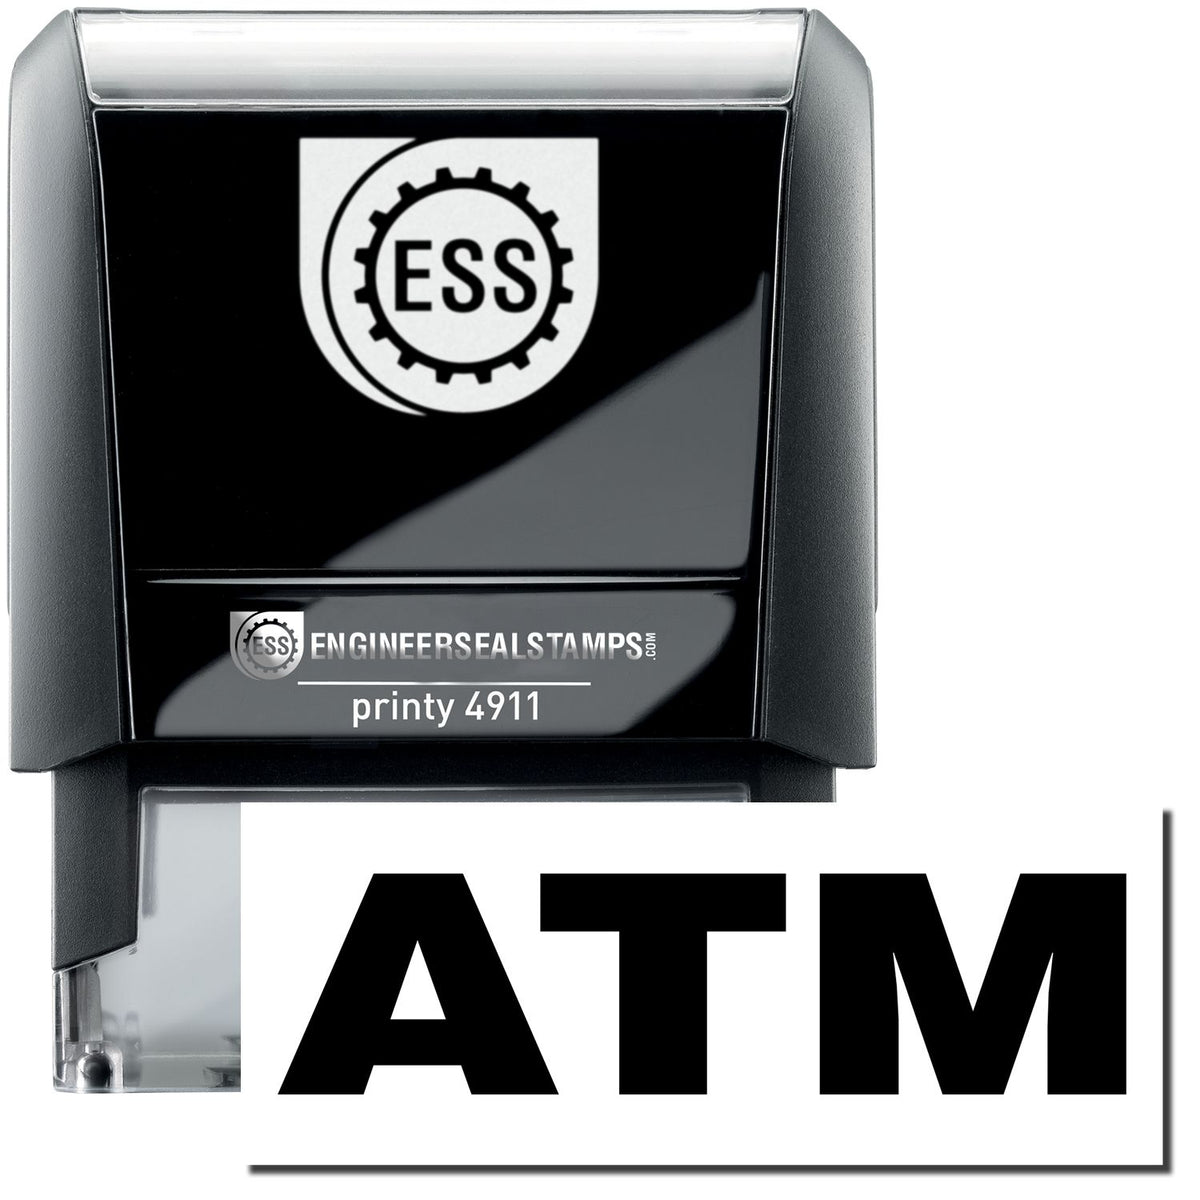 A self-inking stamp with a stamped image showing how the text &quot;ATM&quot; is displayed after stamping.